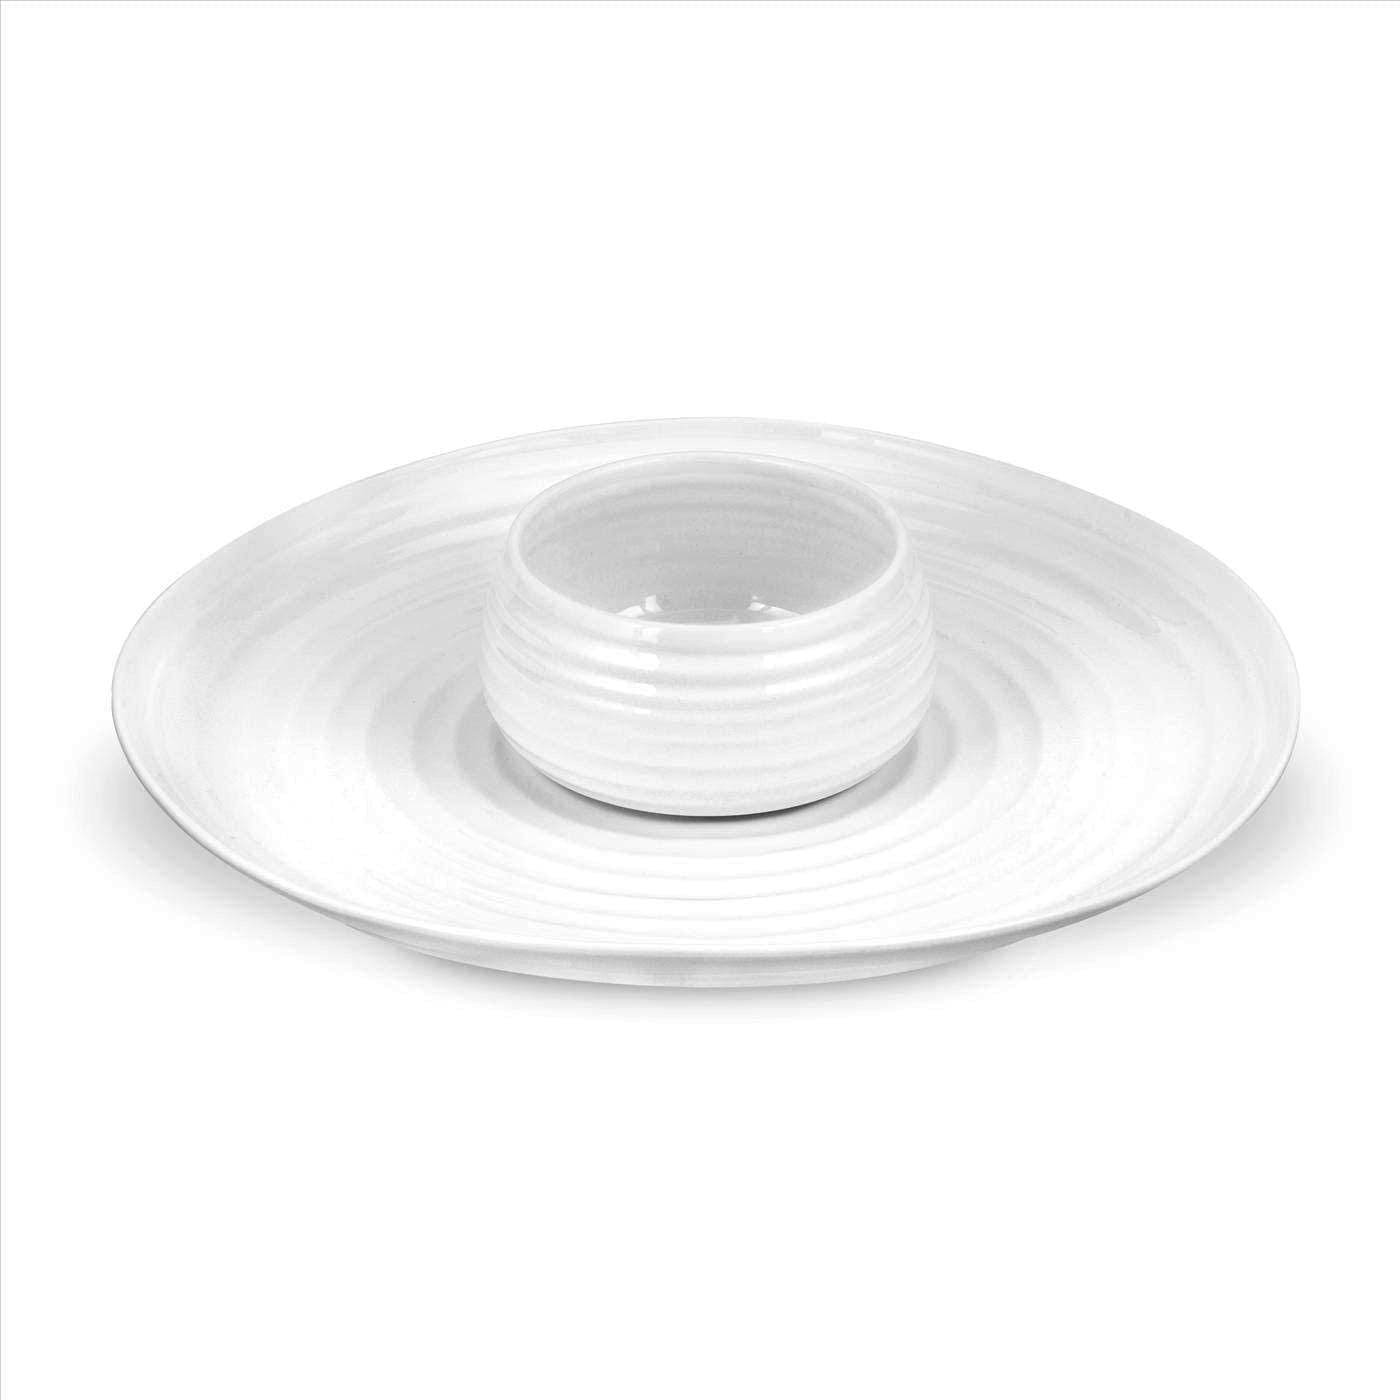 Portmeirion Sophie Conran Dipping Dish and Platter - Royal Gift